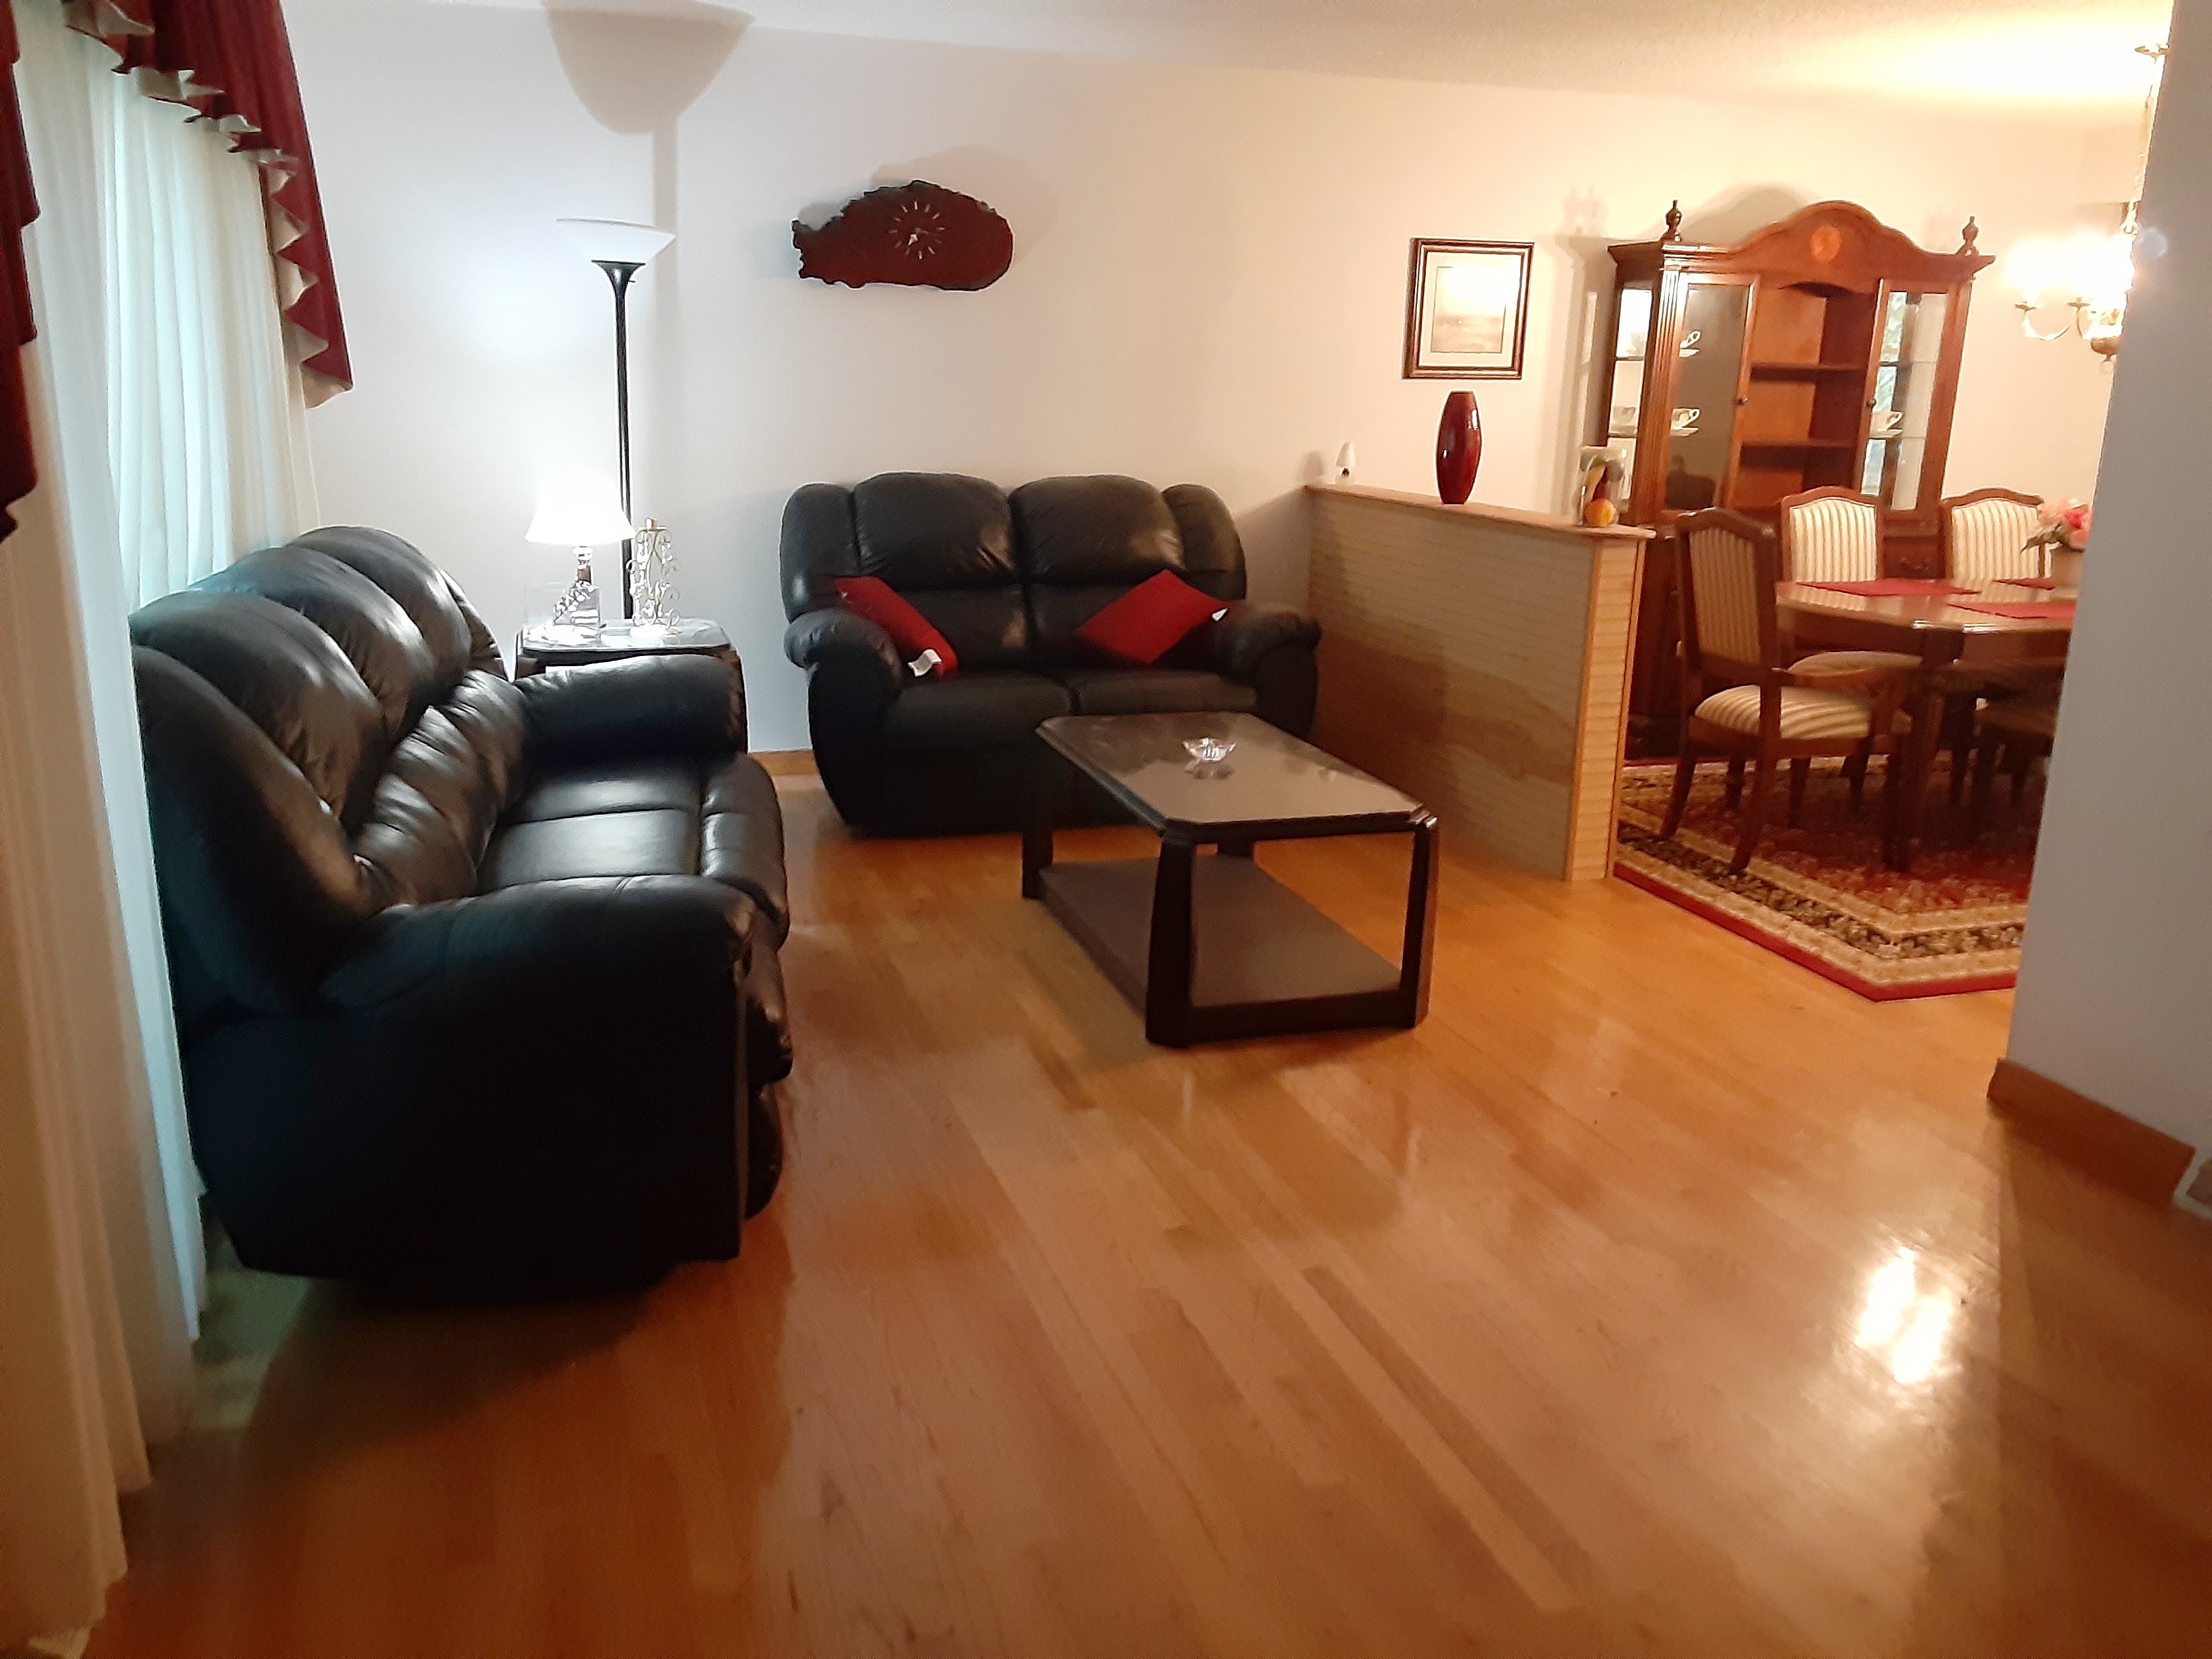 3 Bedrooms / 2.5 Bathrooms - Est. $2,068.00 / Month* for rent in Albany, NY